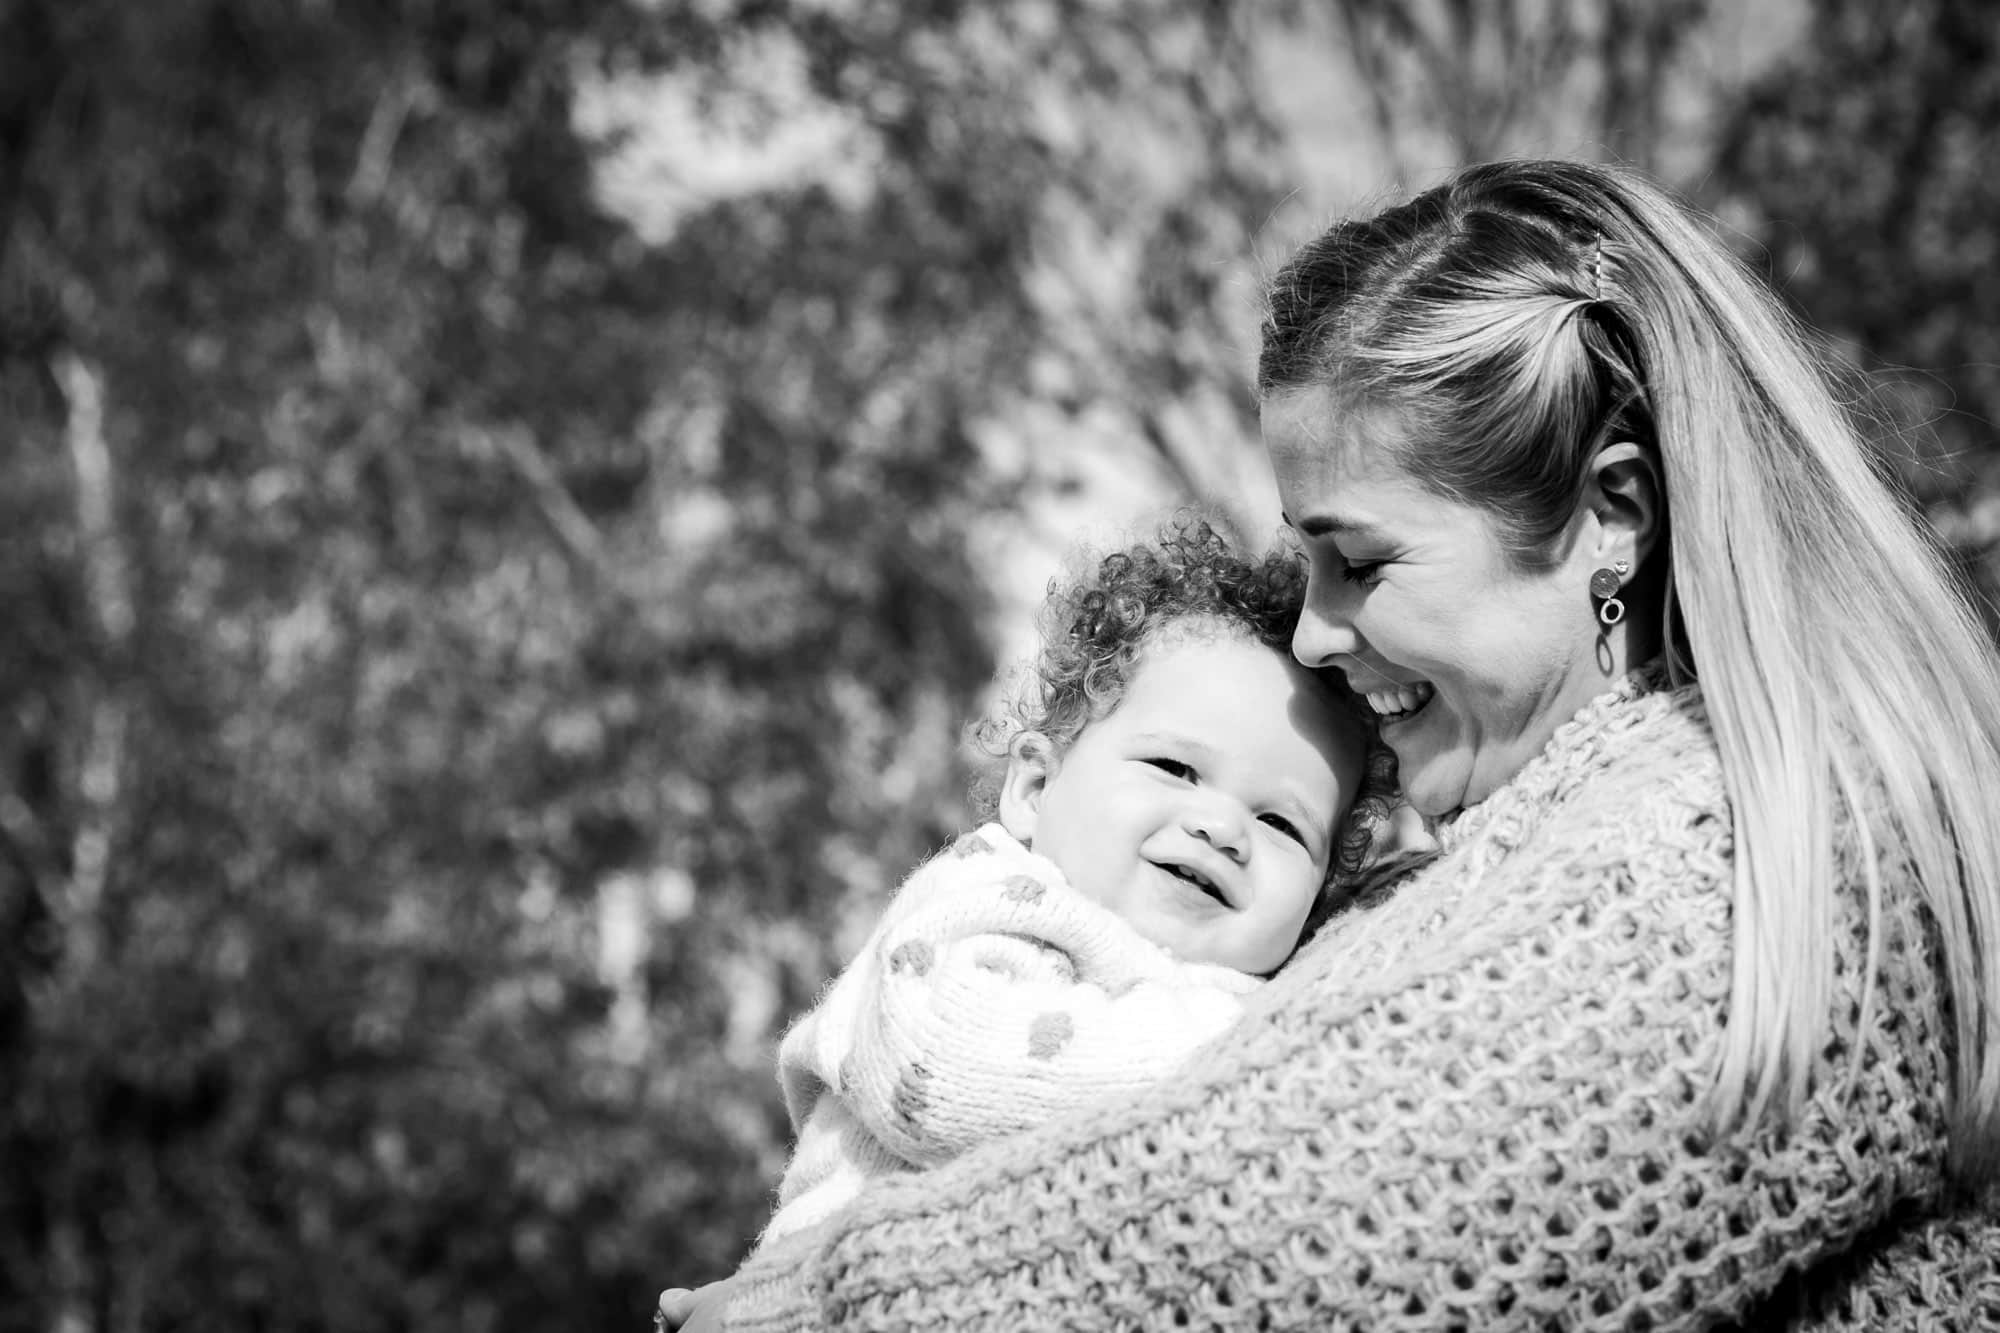 Mum cuddling baby in arms outside in park in black and white Beckenham photoshoot